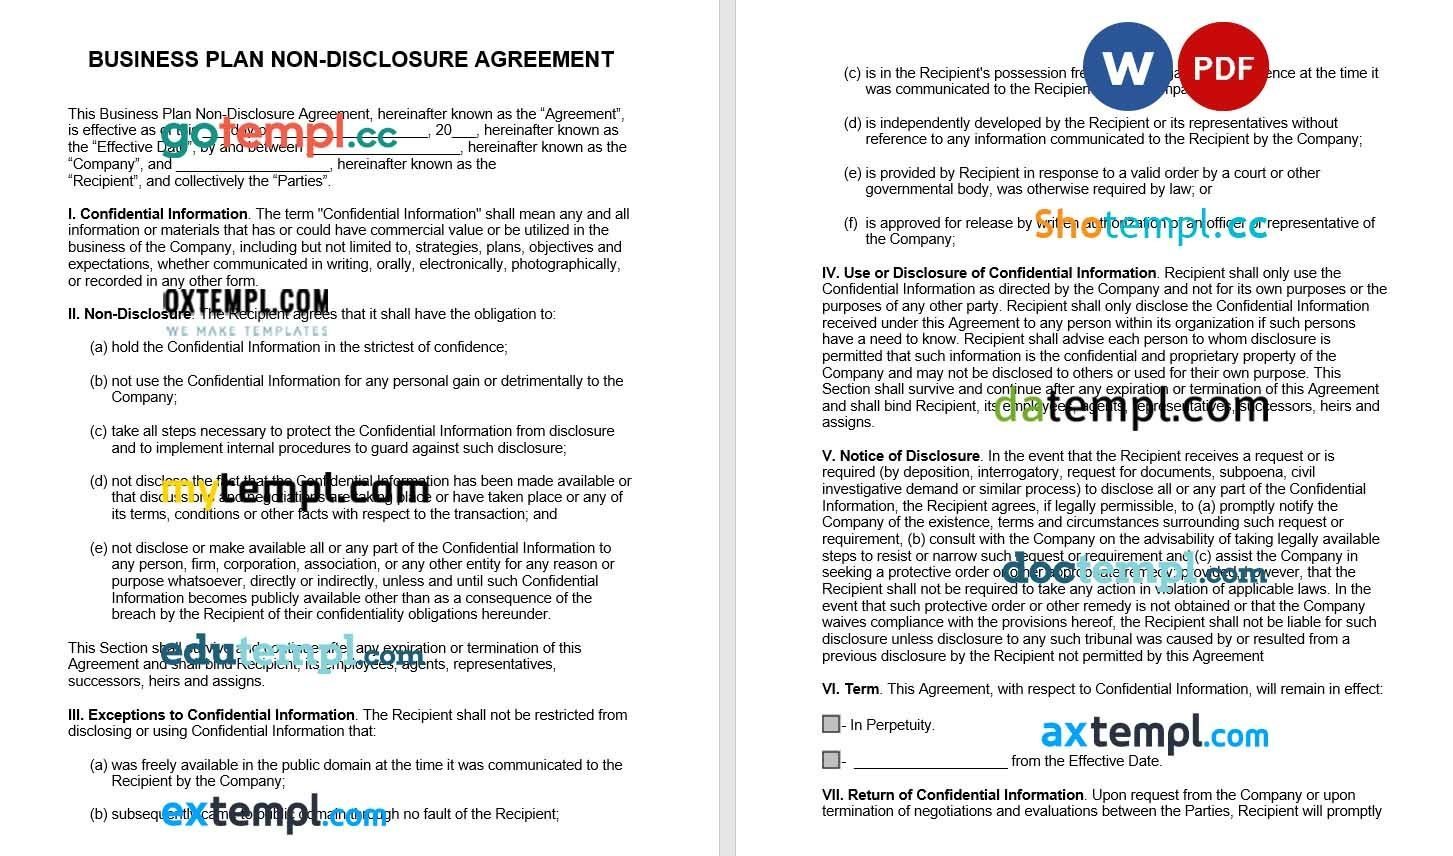 Business Plan Non-Disclosure Agreement Word example, fully editable